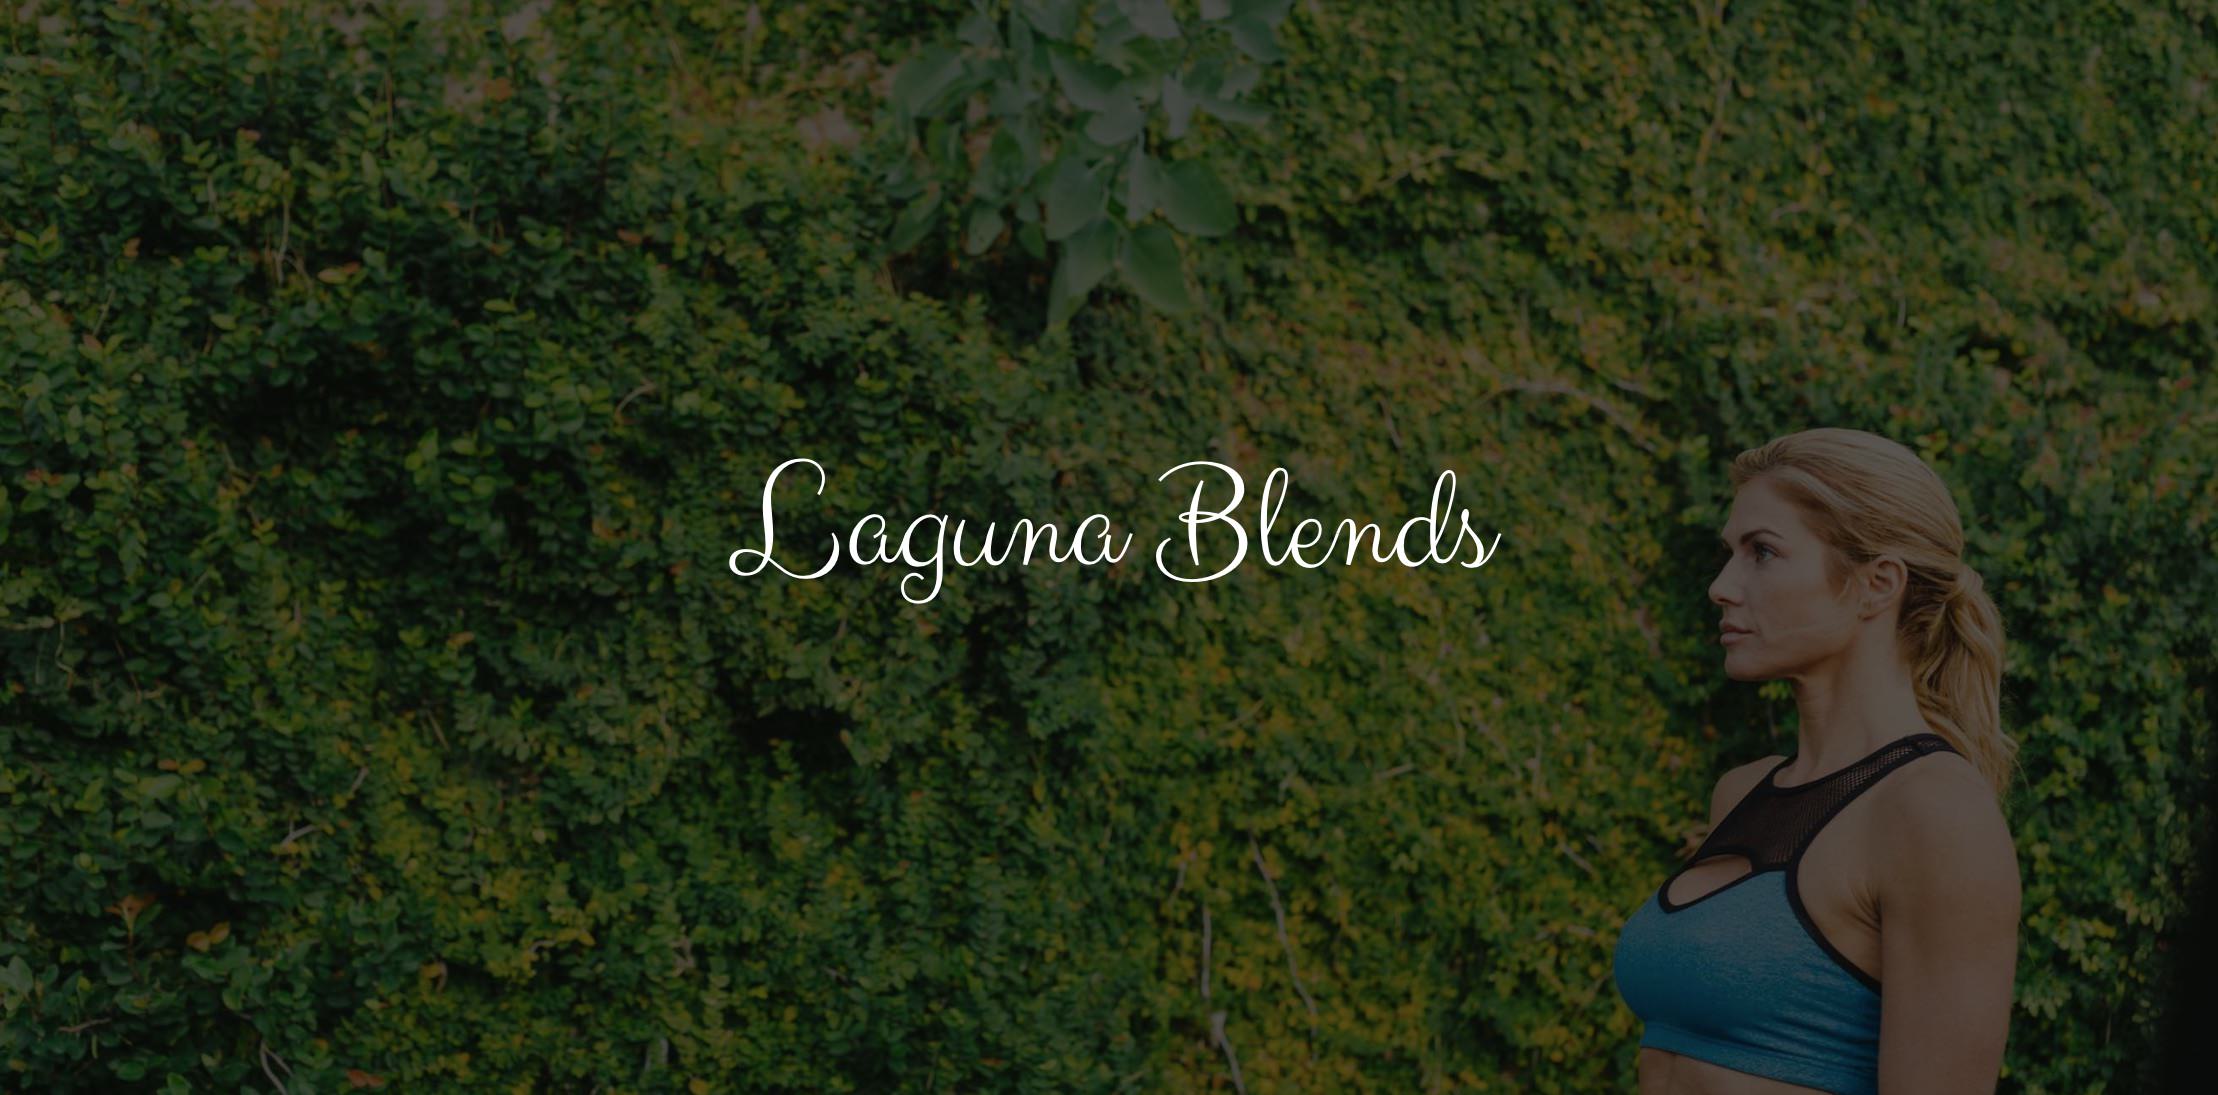 White Laguna Blends logo with side view of woman with long blond hair and waring a black and blue sport bras looking off screen